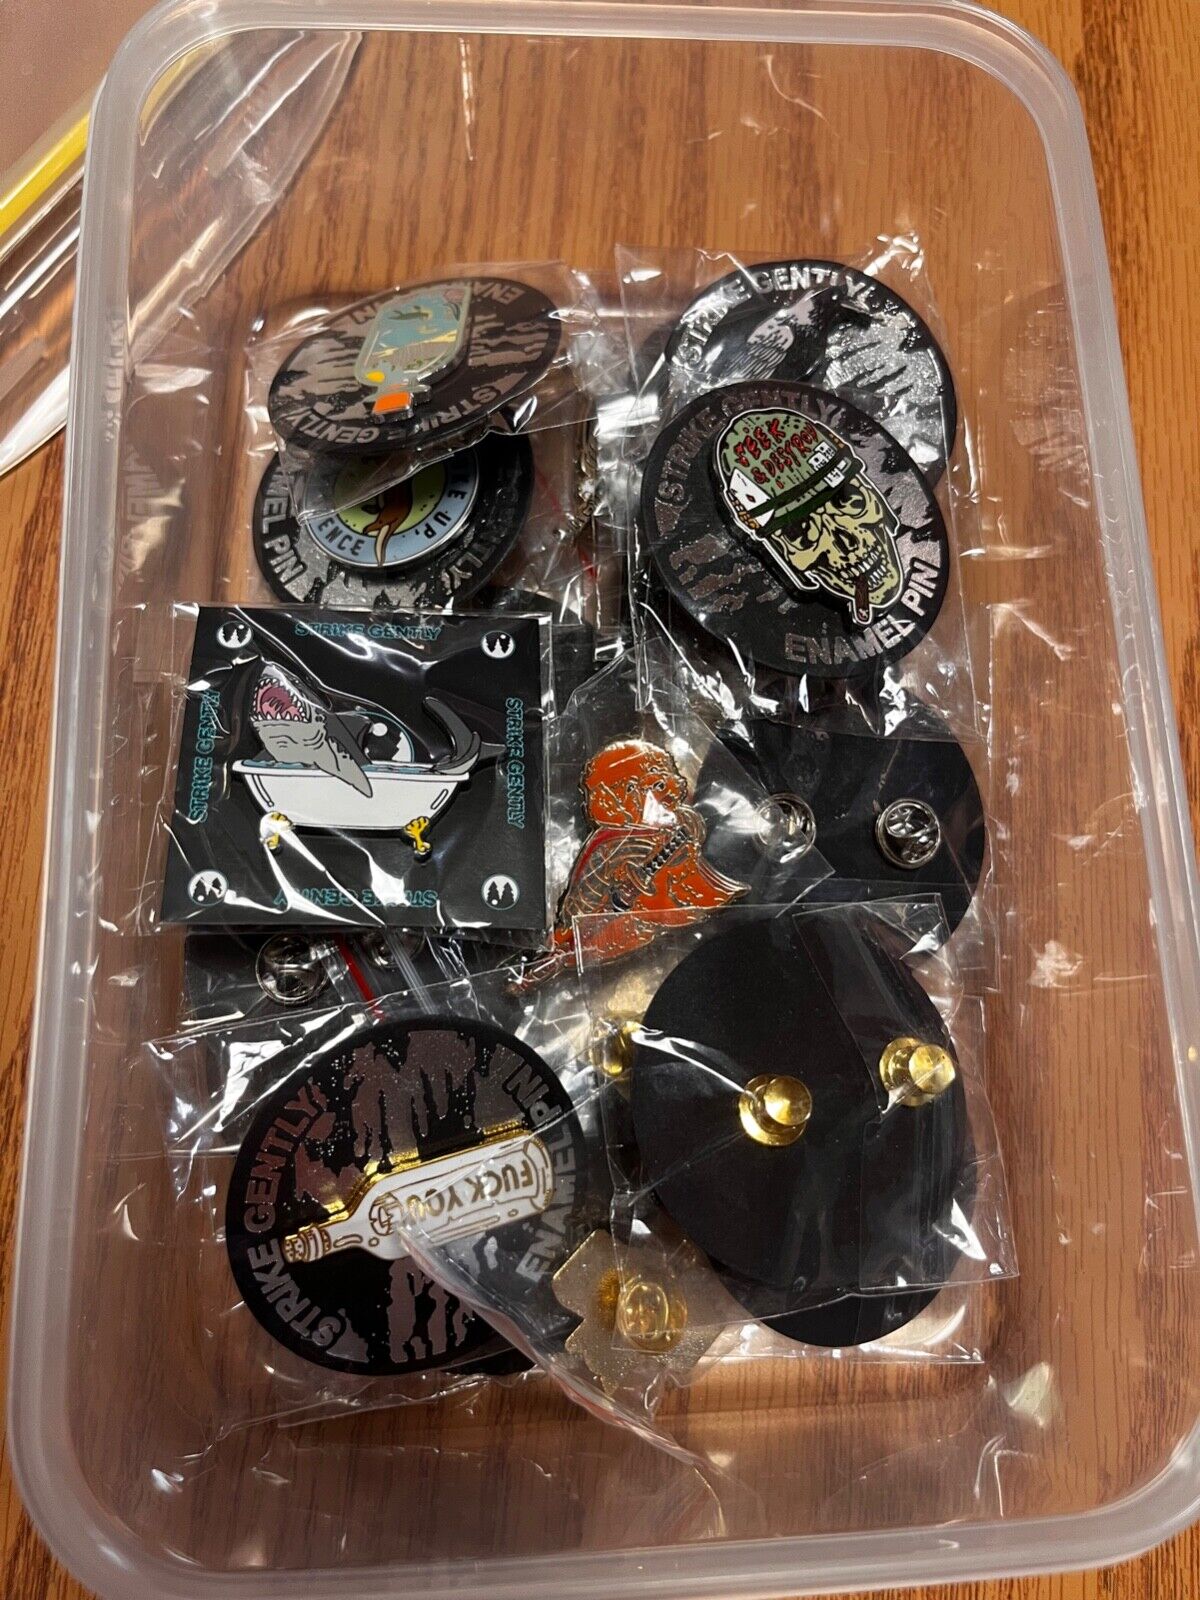 Strike Gently co & Wildcrown pin Lottery. Rare prototypes included, unopened